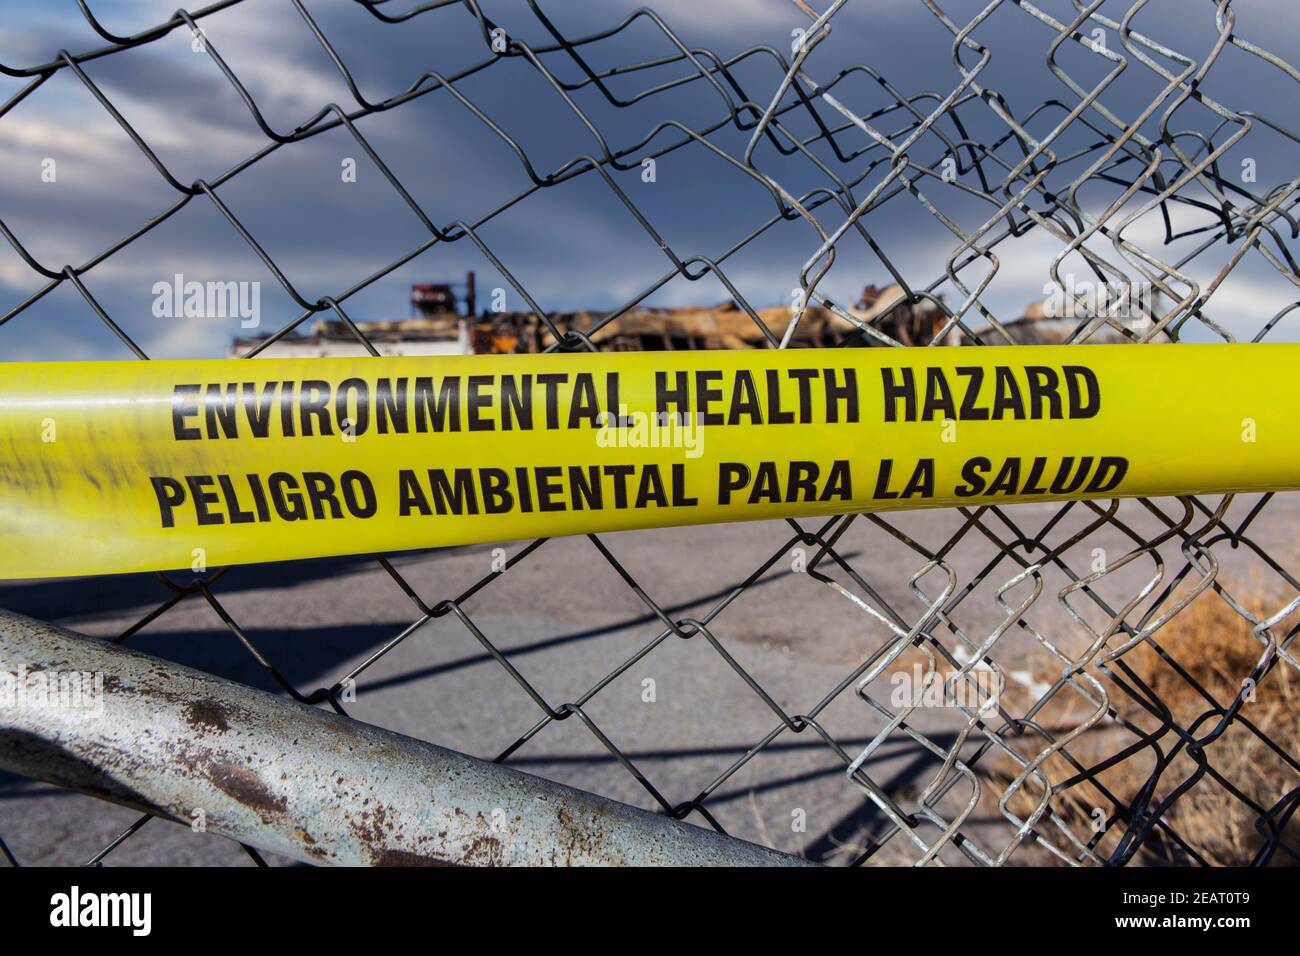 Environmental Health Hazard warning tape on a twisted chain link fence. Stock Photo